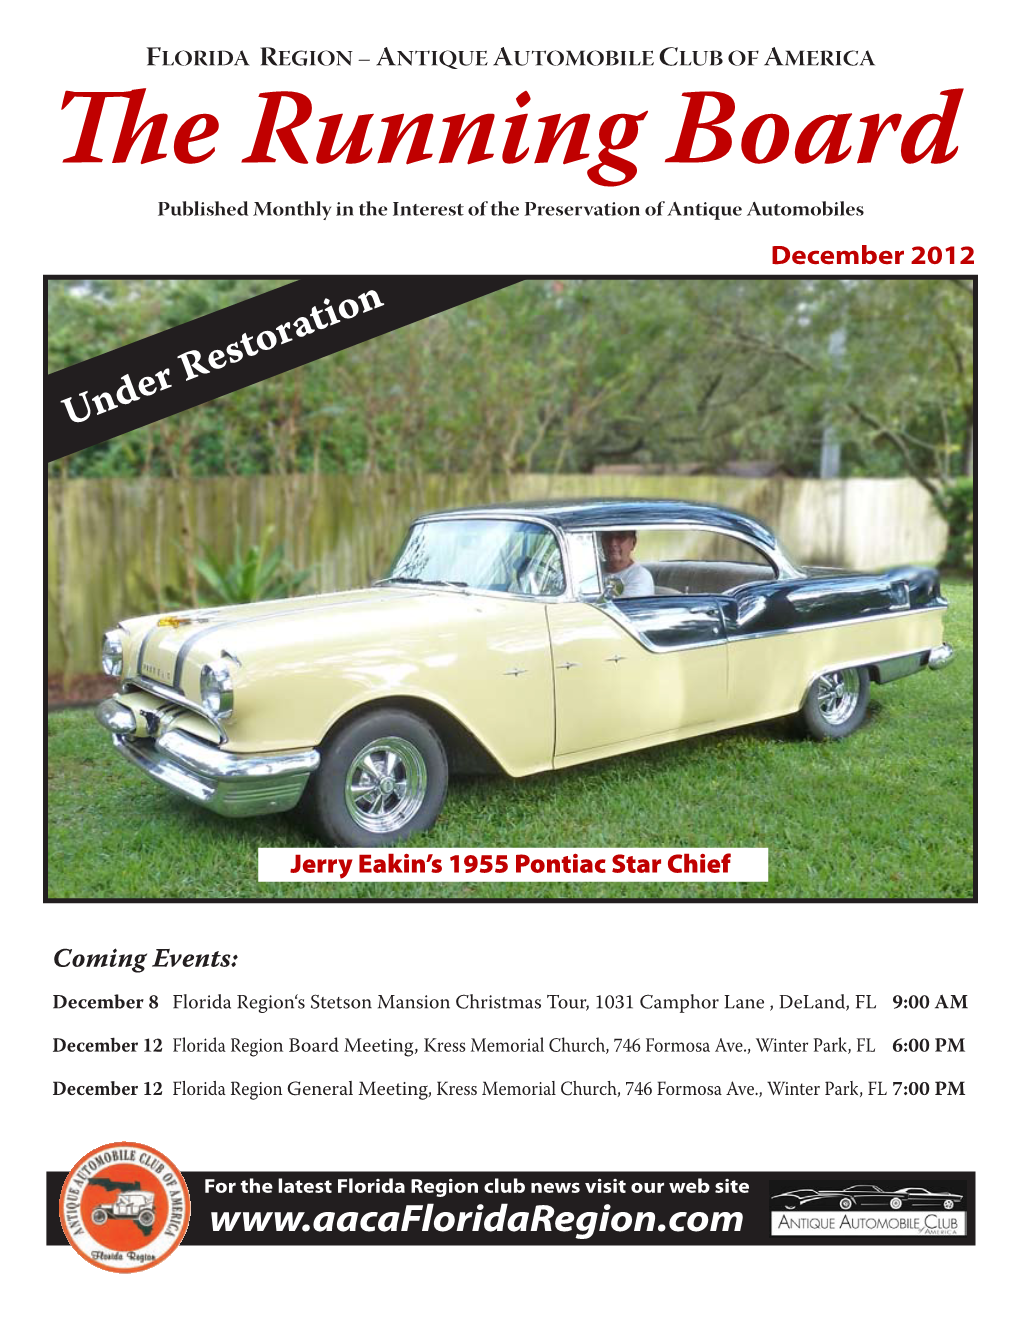 The Running Board Published Monthly in the Interest of the Preservation of Antique Automobiles December 2012